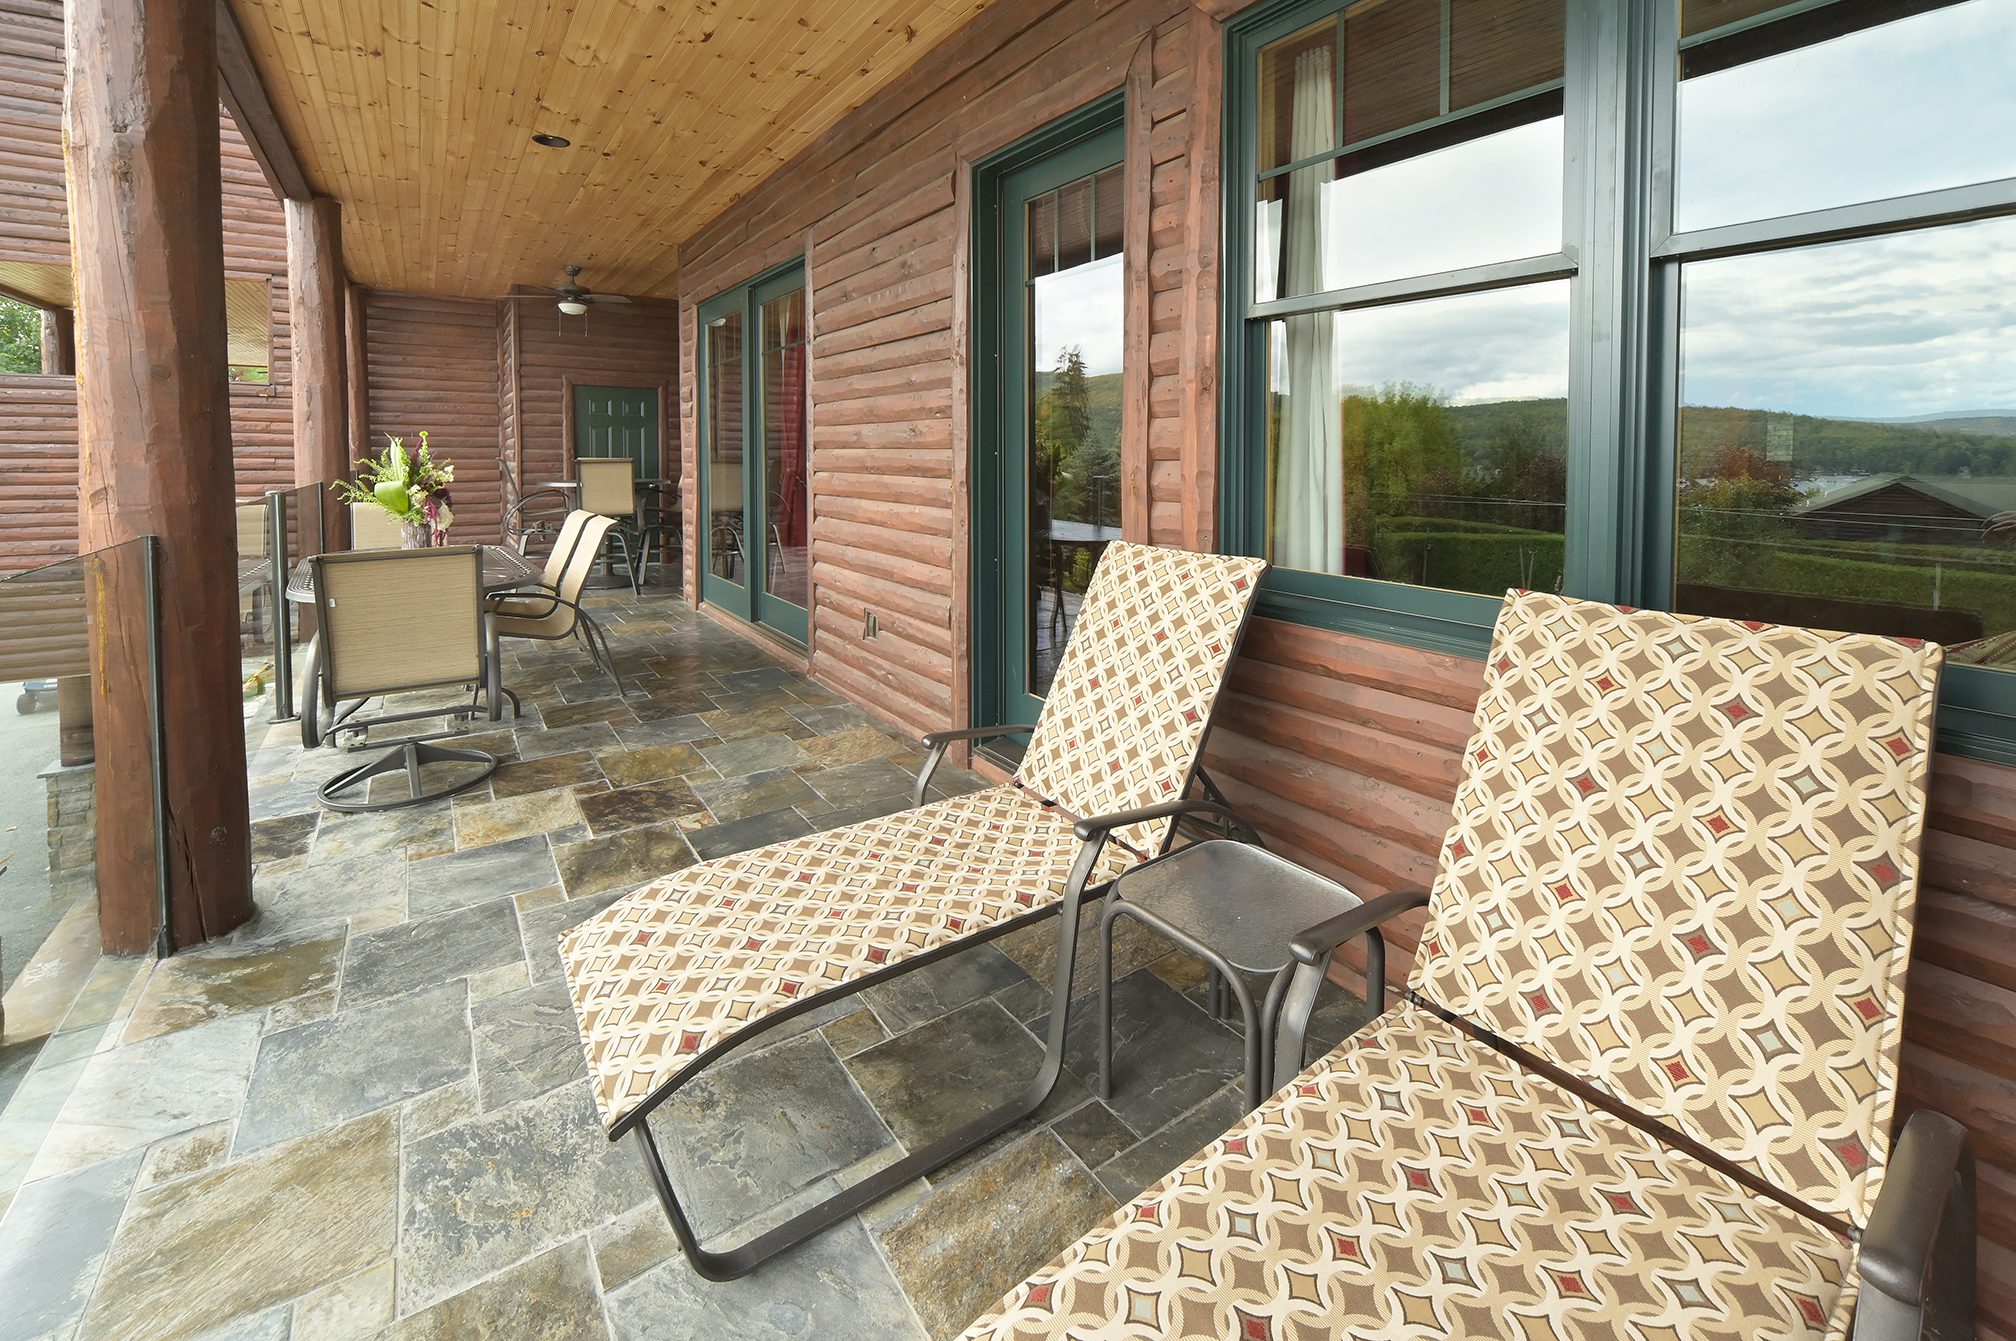 Oak Tree Lodge patio with lounge chairs and patio table and chairs